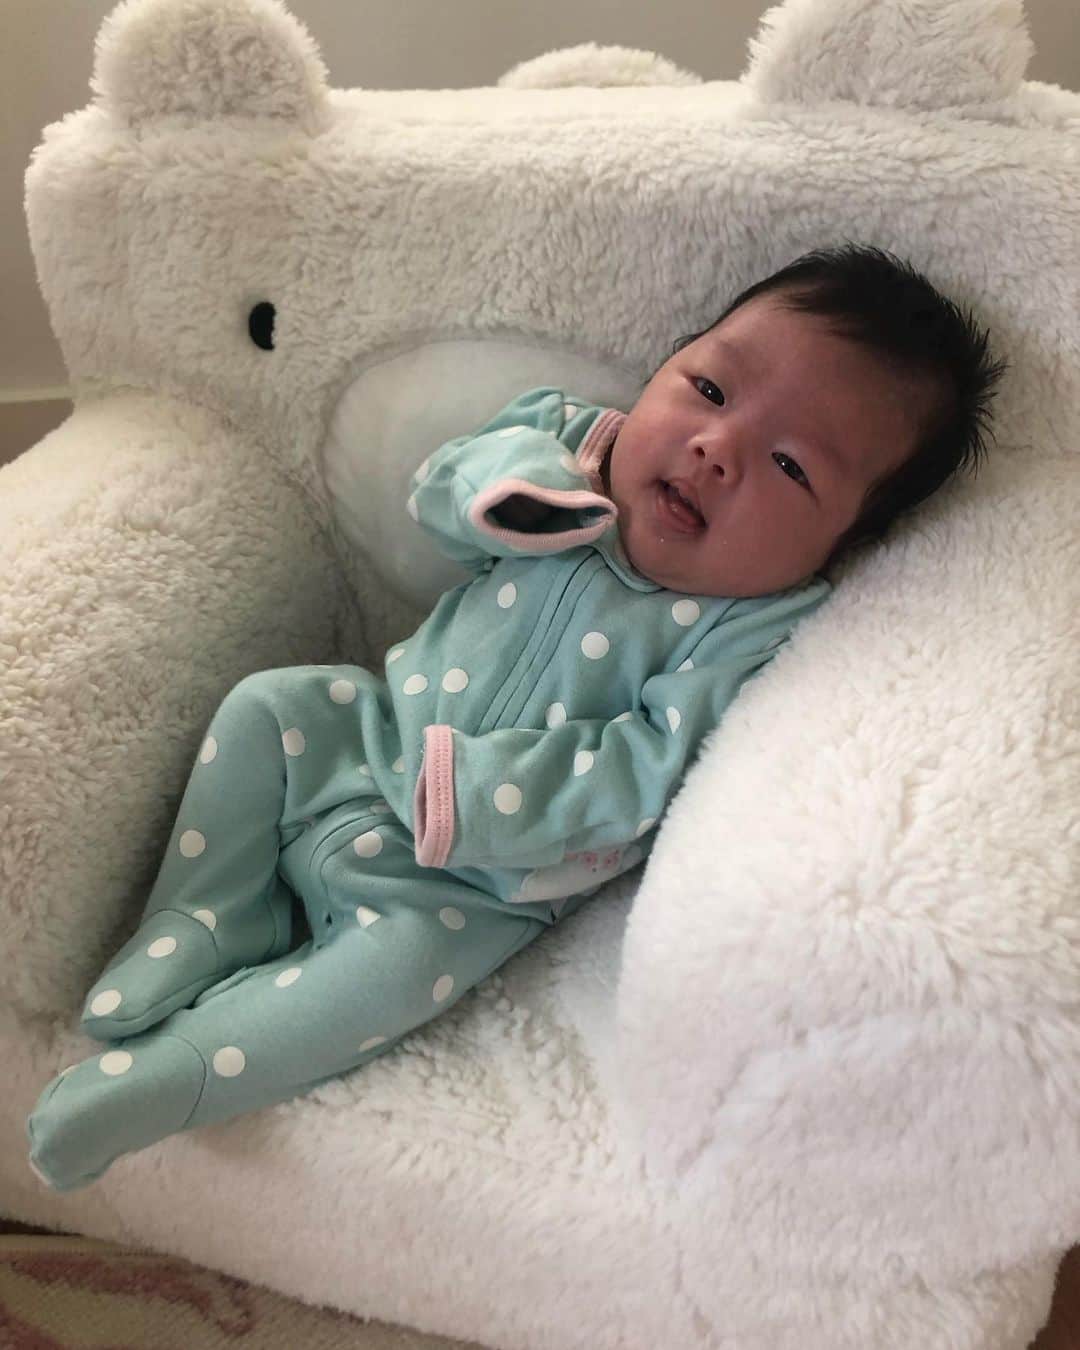 伊藤由奈さんのインスタグラム写真 - (伊藤由奈Instagram)「Our daughter, Ellie, was born on 02/23/23👶🏻🎀💝Labor was long and intense (30+ hours!!🫣)and ended up in a C-section, but it’s true what everyone says…it was all worth it!!🥰We are truly grateful and are over the moon with joy🤗💕thank you so, so much to Queens Hospital, and our L&D team, postpartum team, pediatricians, and even room service and cleaning staff!!😘😘😘special shout-out to my OBGYN, Dr. Robb Ohtani, thank you so very much for allowing me to labor the way I wanted to, and for as long as I wanted to!😌💓 and of course, last but absolutely not least, thank you to our wonderful doula, Jenn M!!🥹💝大変遅くなりましたが報告させて下さい….私たちの娘Ellieは、2月23日2023年に無事に産まれました！🤗💕new momで毎日不思議な事バカリです😲が、とってもハッピーで毎日Ellieちゃんに歌ってます！😋🎶ちなみにEllieちゃんの最近のお気に入りの曲は私たちの結婚式でも素晴らしいパフォーマンスしてくれたJosh Tatofiの”Good Morning Beautiful”でございます！😍🎶この曲をplayすると、Ellieはとっても静かになってめっちゃ真剣に聴いている顔をします！（笑）妊娠中、沢山聴いてたからかなっ？！🤗🎶皆さん、元気でいて下さいね💓また近々upします！🥹💗and as always, thank you….🥰😘🥰😘 P.S. 今年の6月、Josh Tatofiが日本ツアーあるらしいです！私も行きたいな〜😍🎶🎶🎶行く人、是非感想を教えて下さいね！！😆💕」4月3日 9時40分 - _yunaito